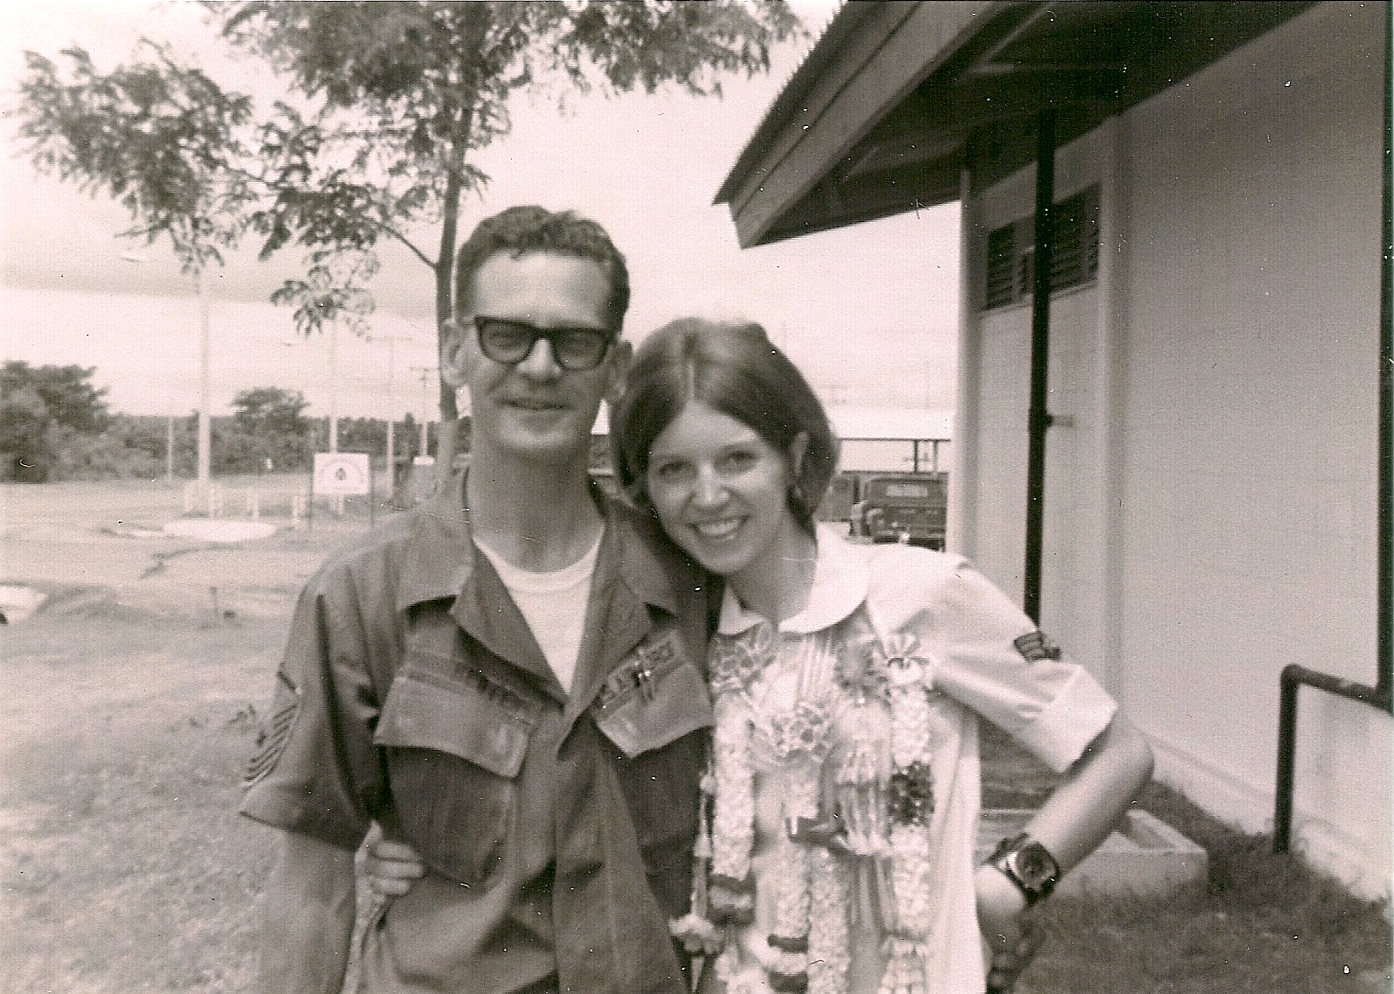 Leaving Korat and my friend and confidante, CMSgt Beote, 10 June, 1971